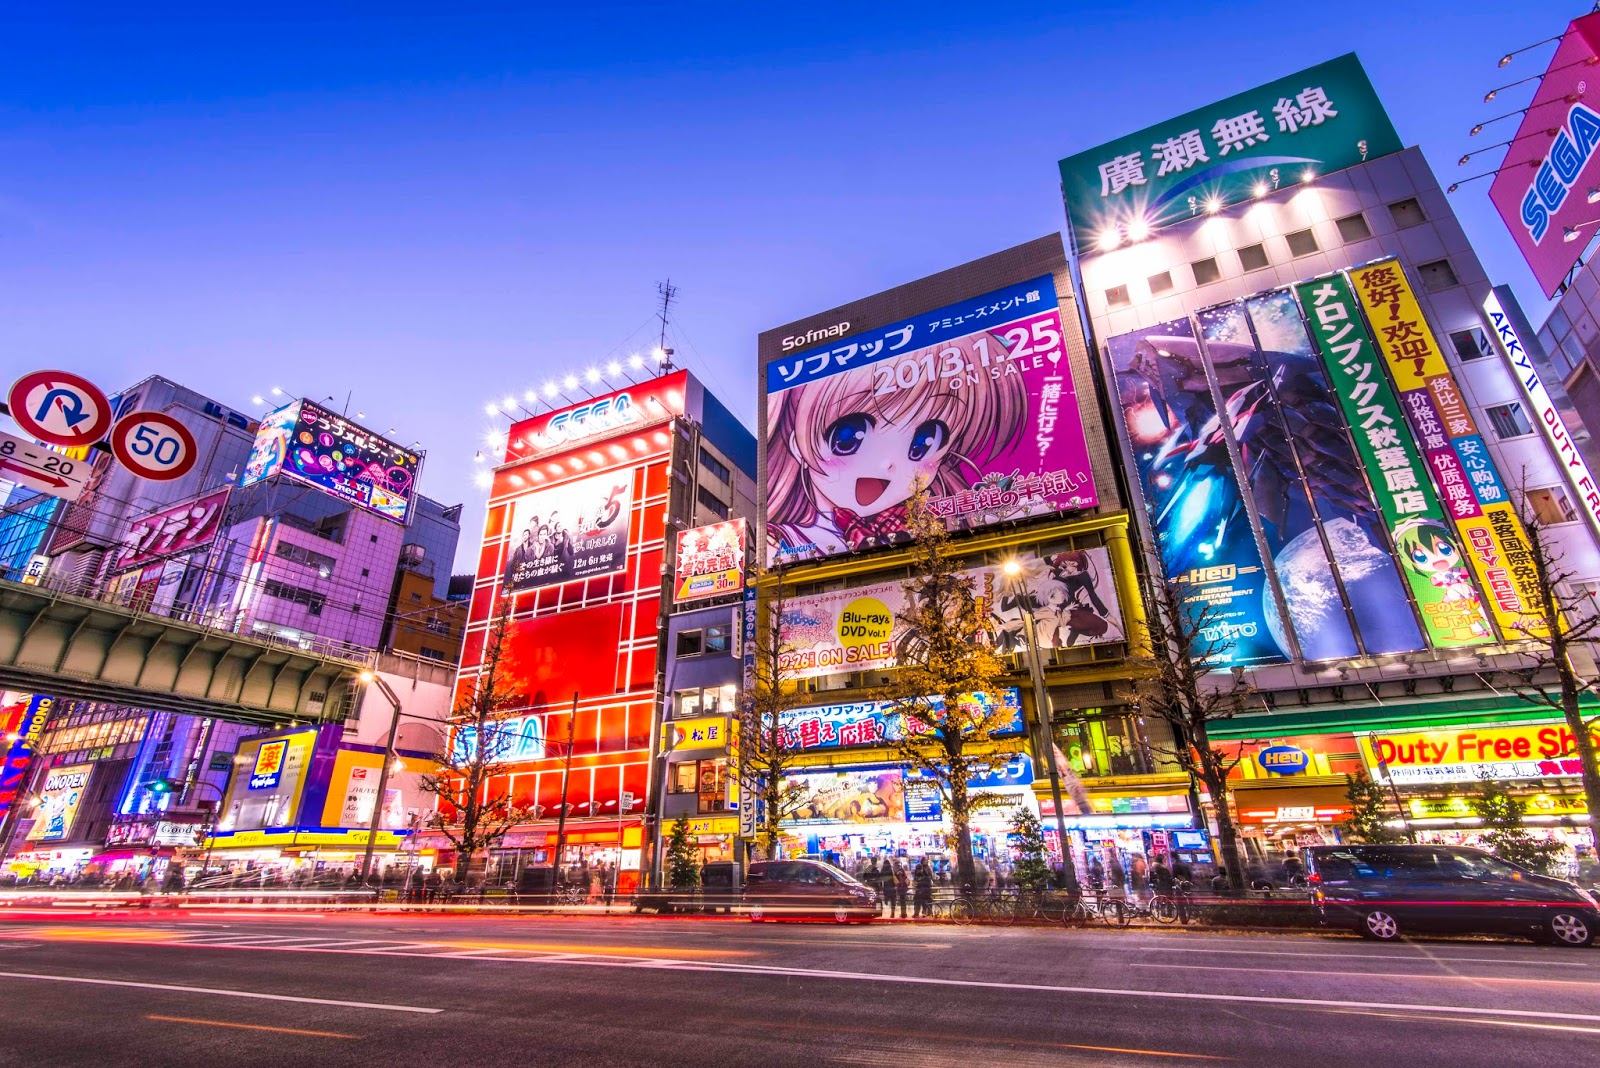 Must Visit Spots In Akihabara For Anime Fans Suggested By A Worldly Known Cosplayer